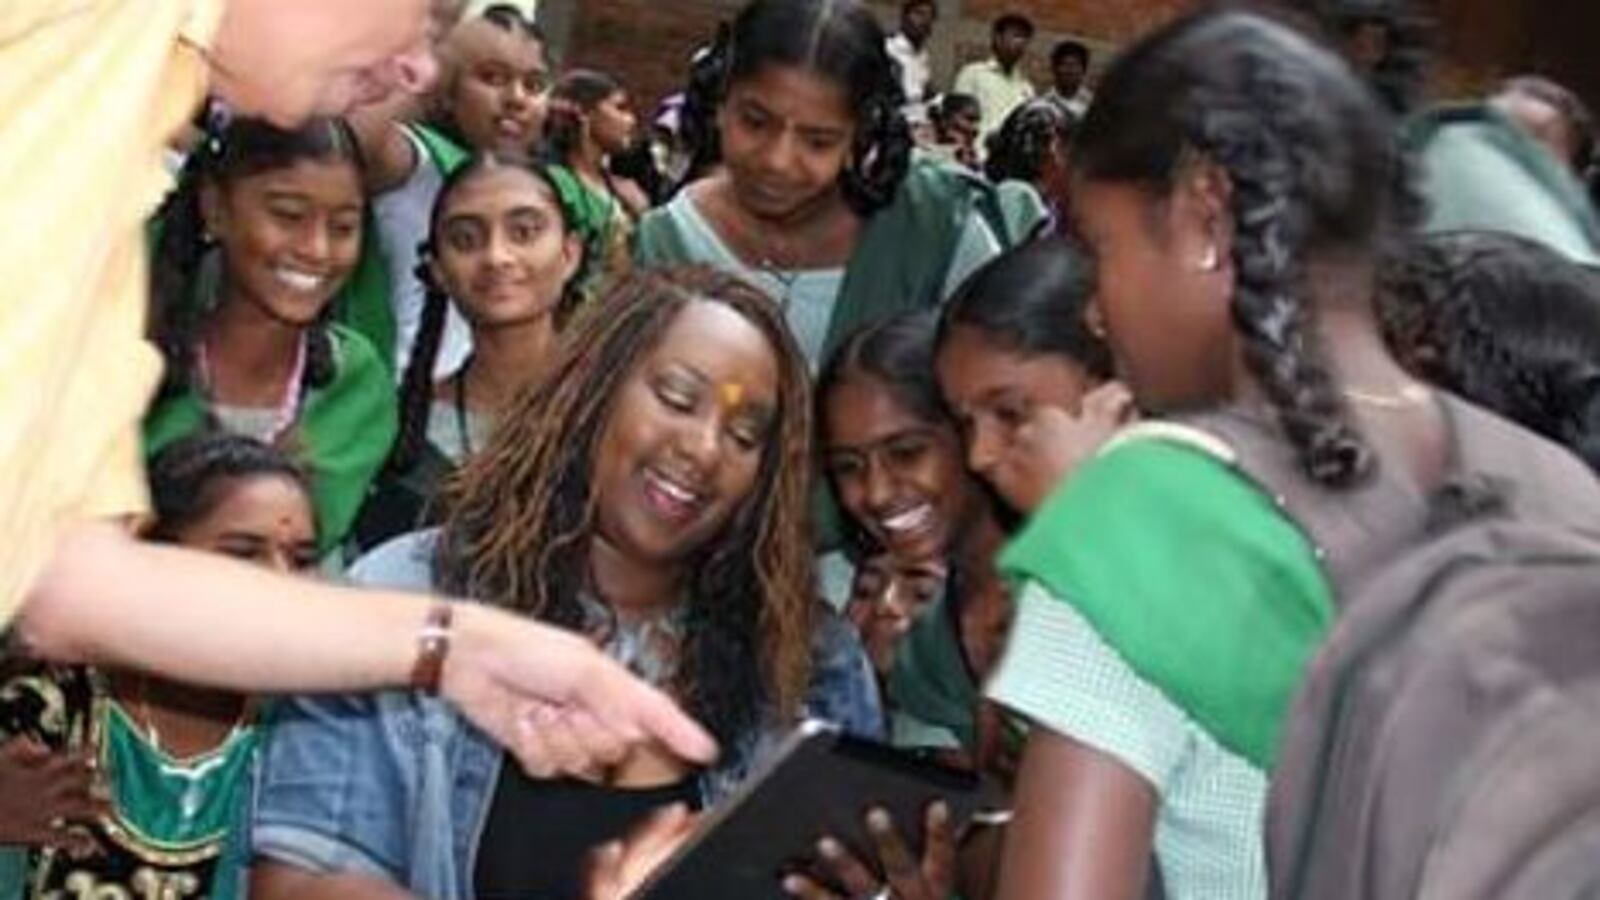 A teacher holds a tablet computer. A group of Indian children are gathered around her smiling. Melissa Collins visits with students during her two-week trip to India last summer.